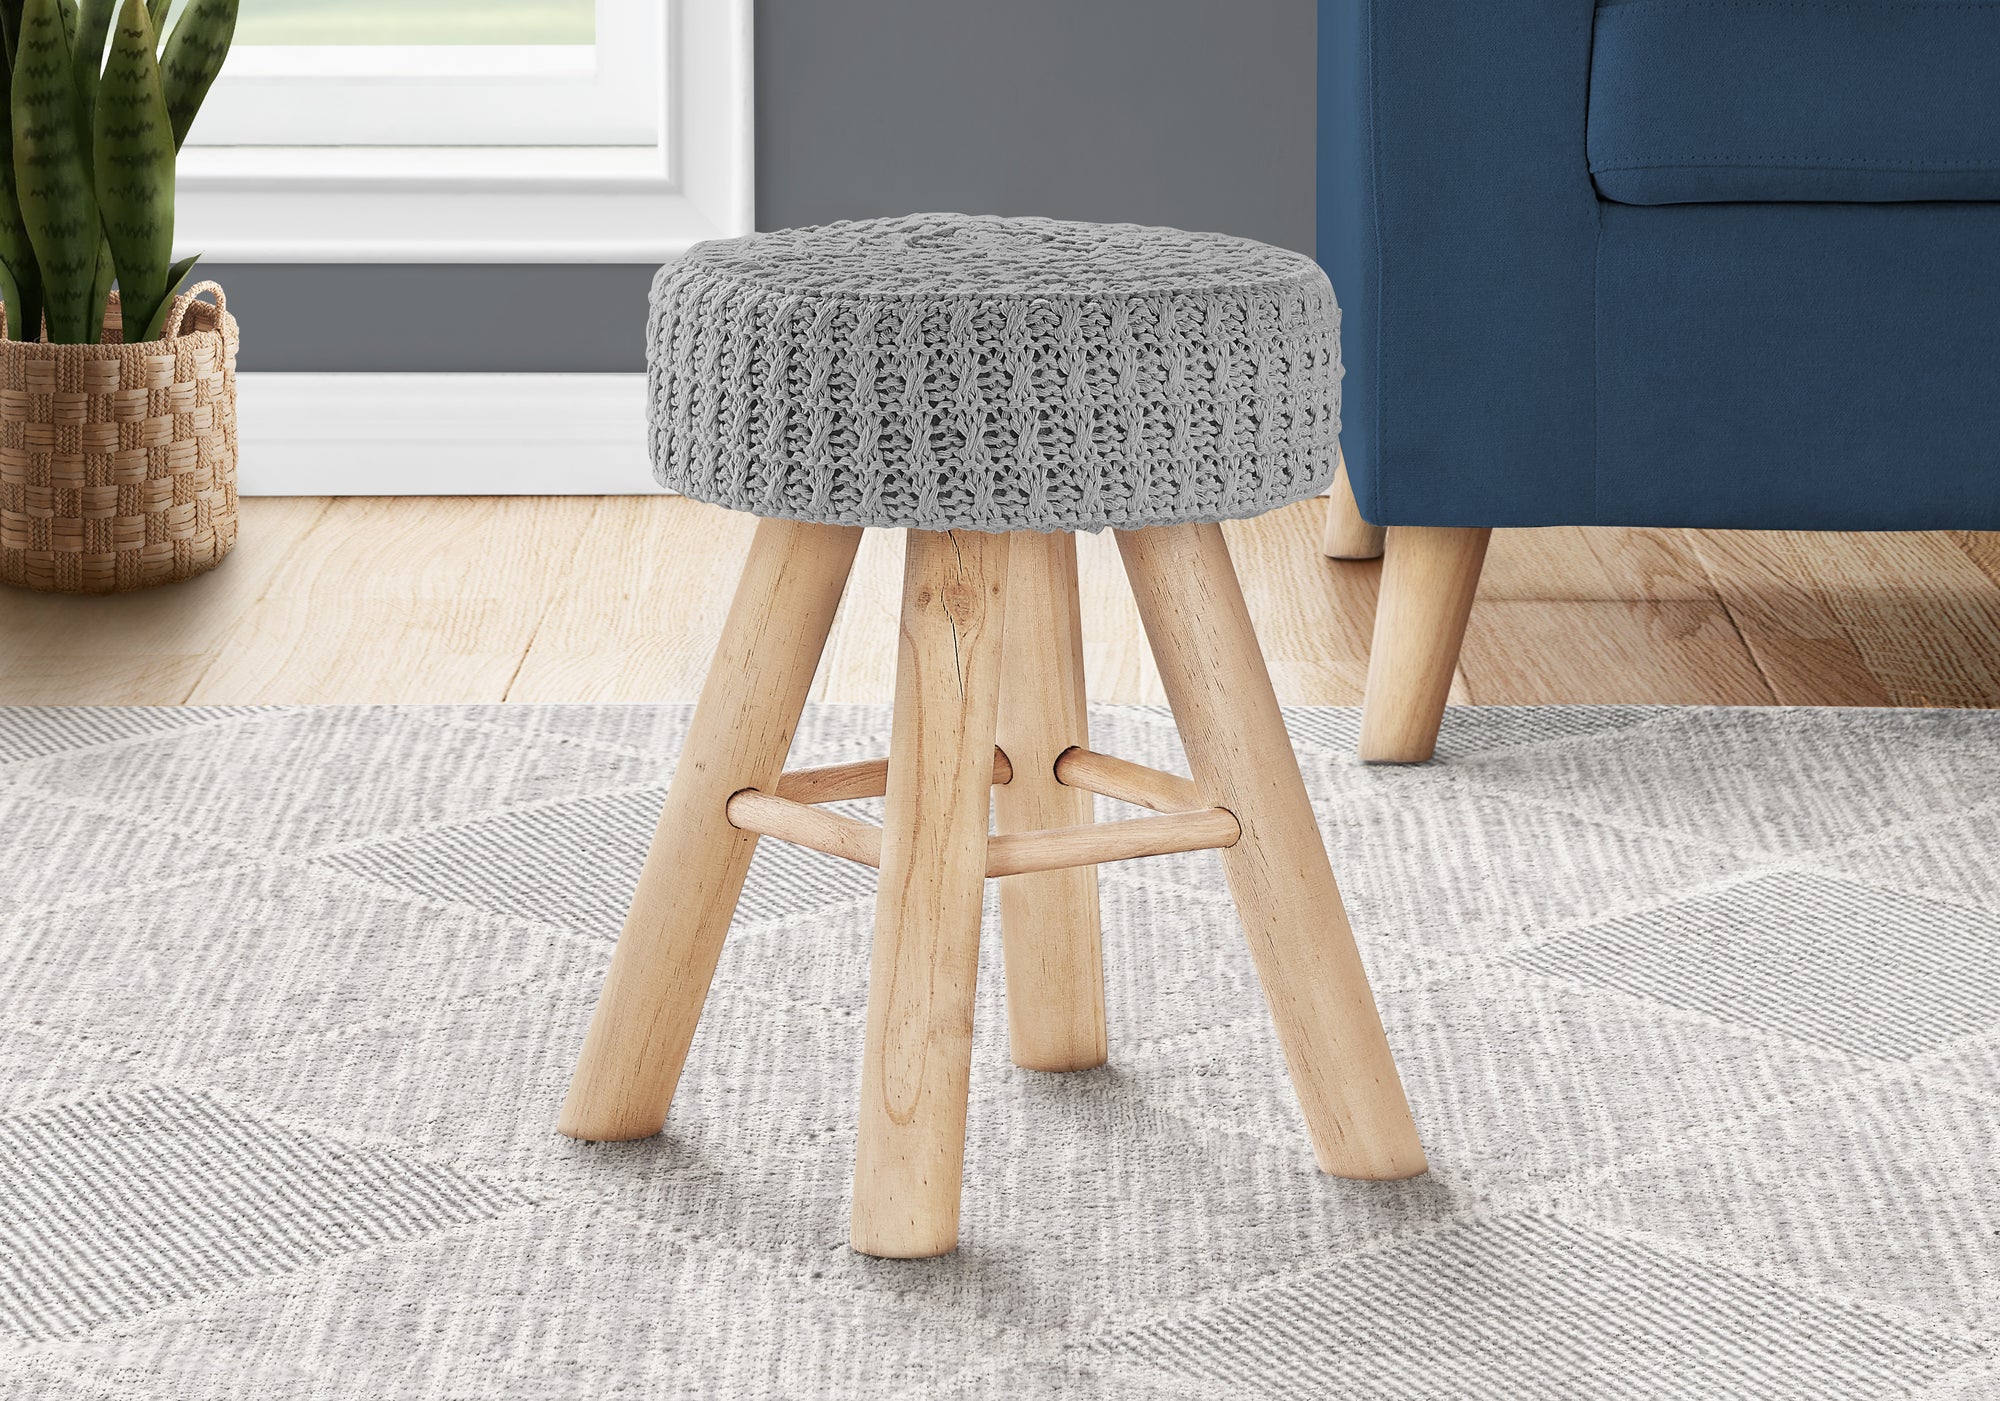 MN-279013    Ottoman, Pouf, Footrest, Foot Stool, 12" Round, Velvet Fabric, Wood Legs, Grey, Natural, Contemporary, Modern